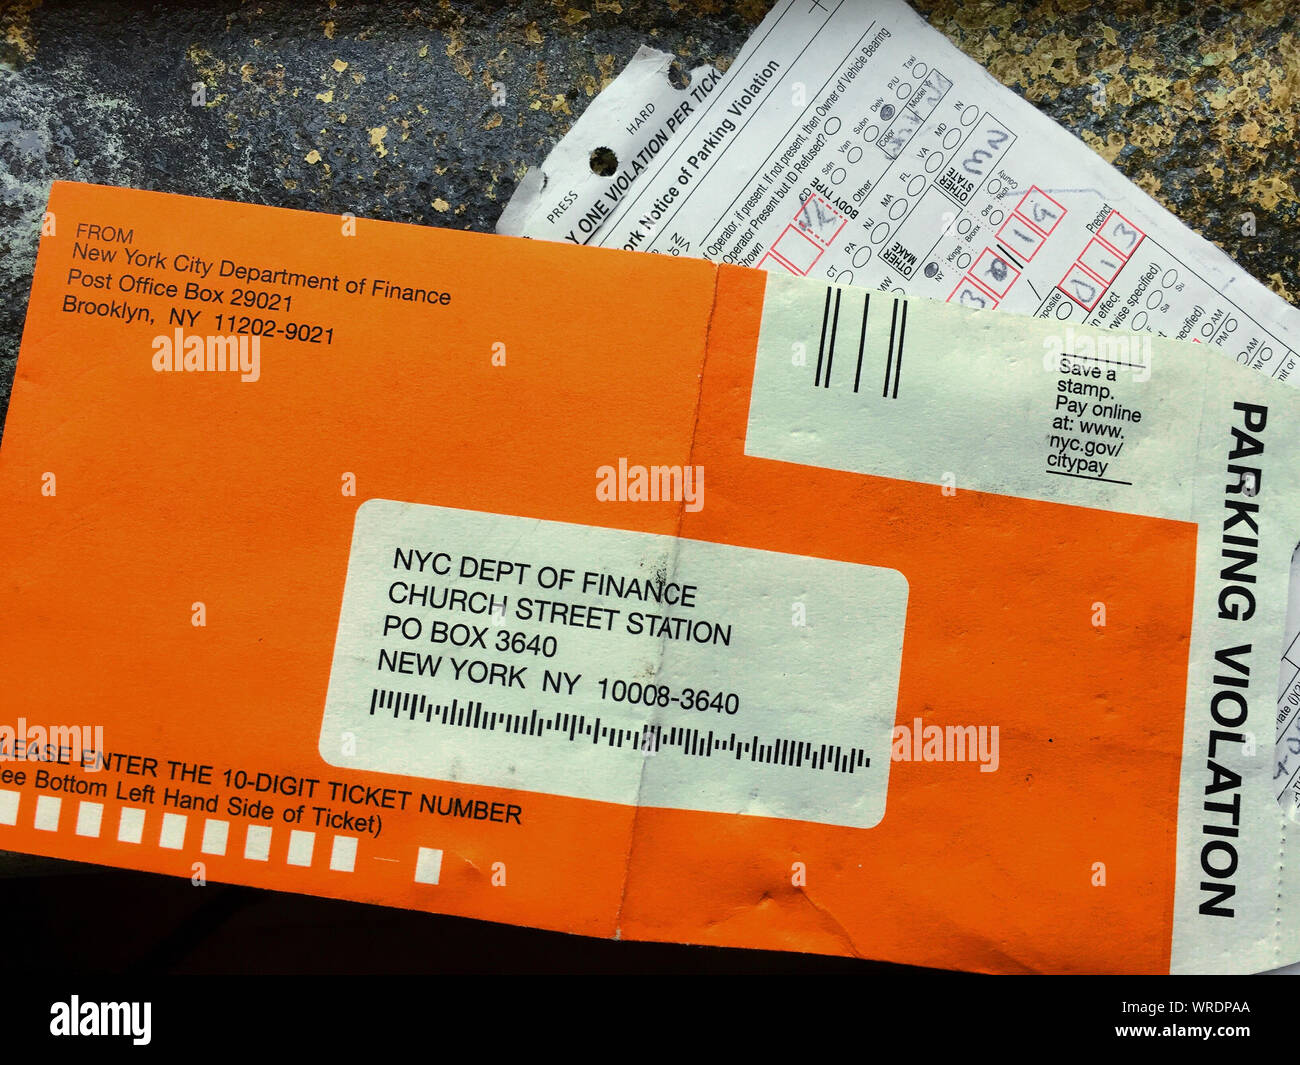 Parking Violation Envelop and Ticket, NYC Stock Photo - Alamy